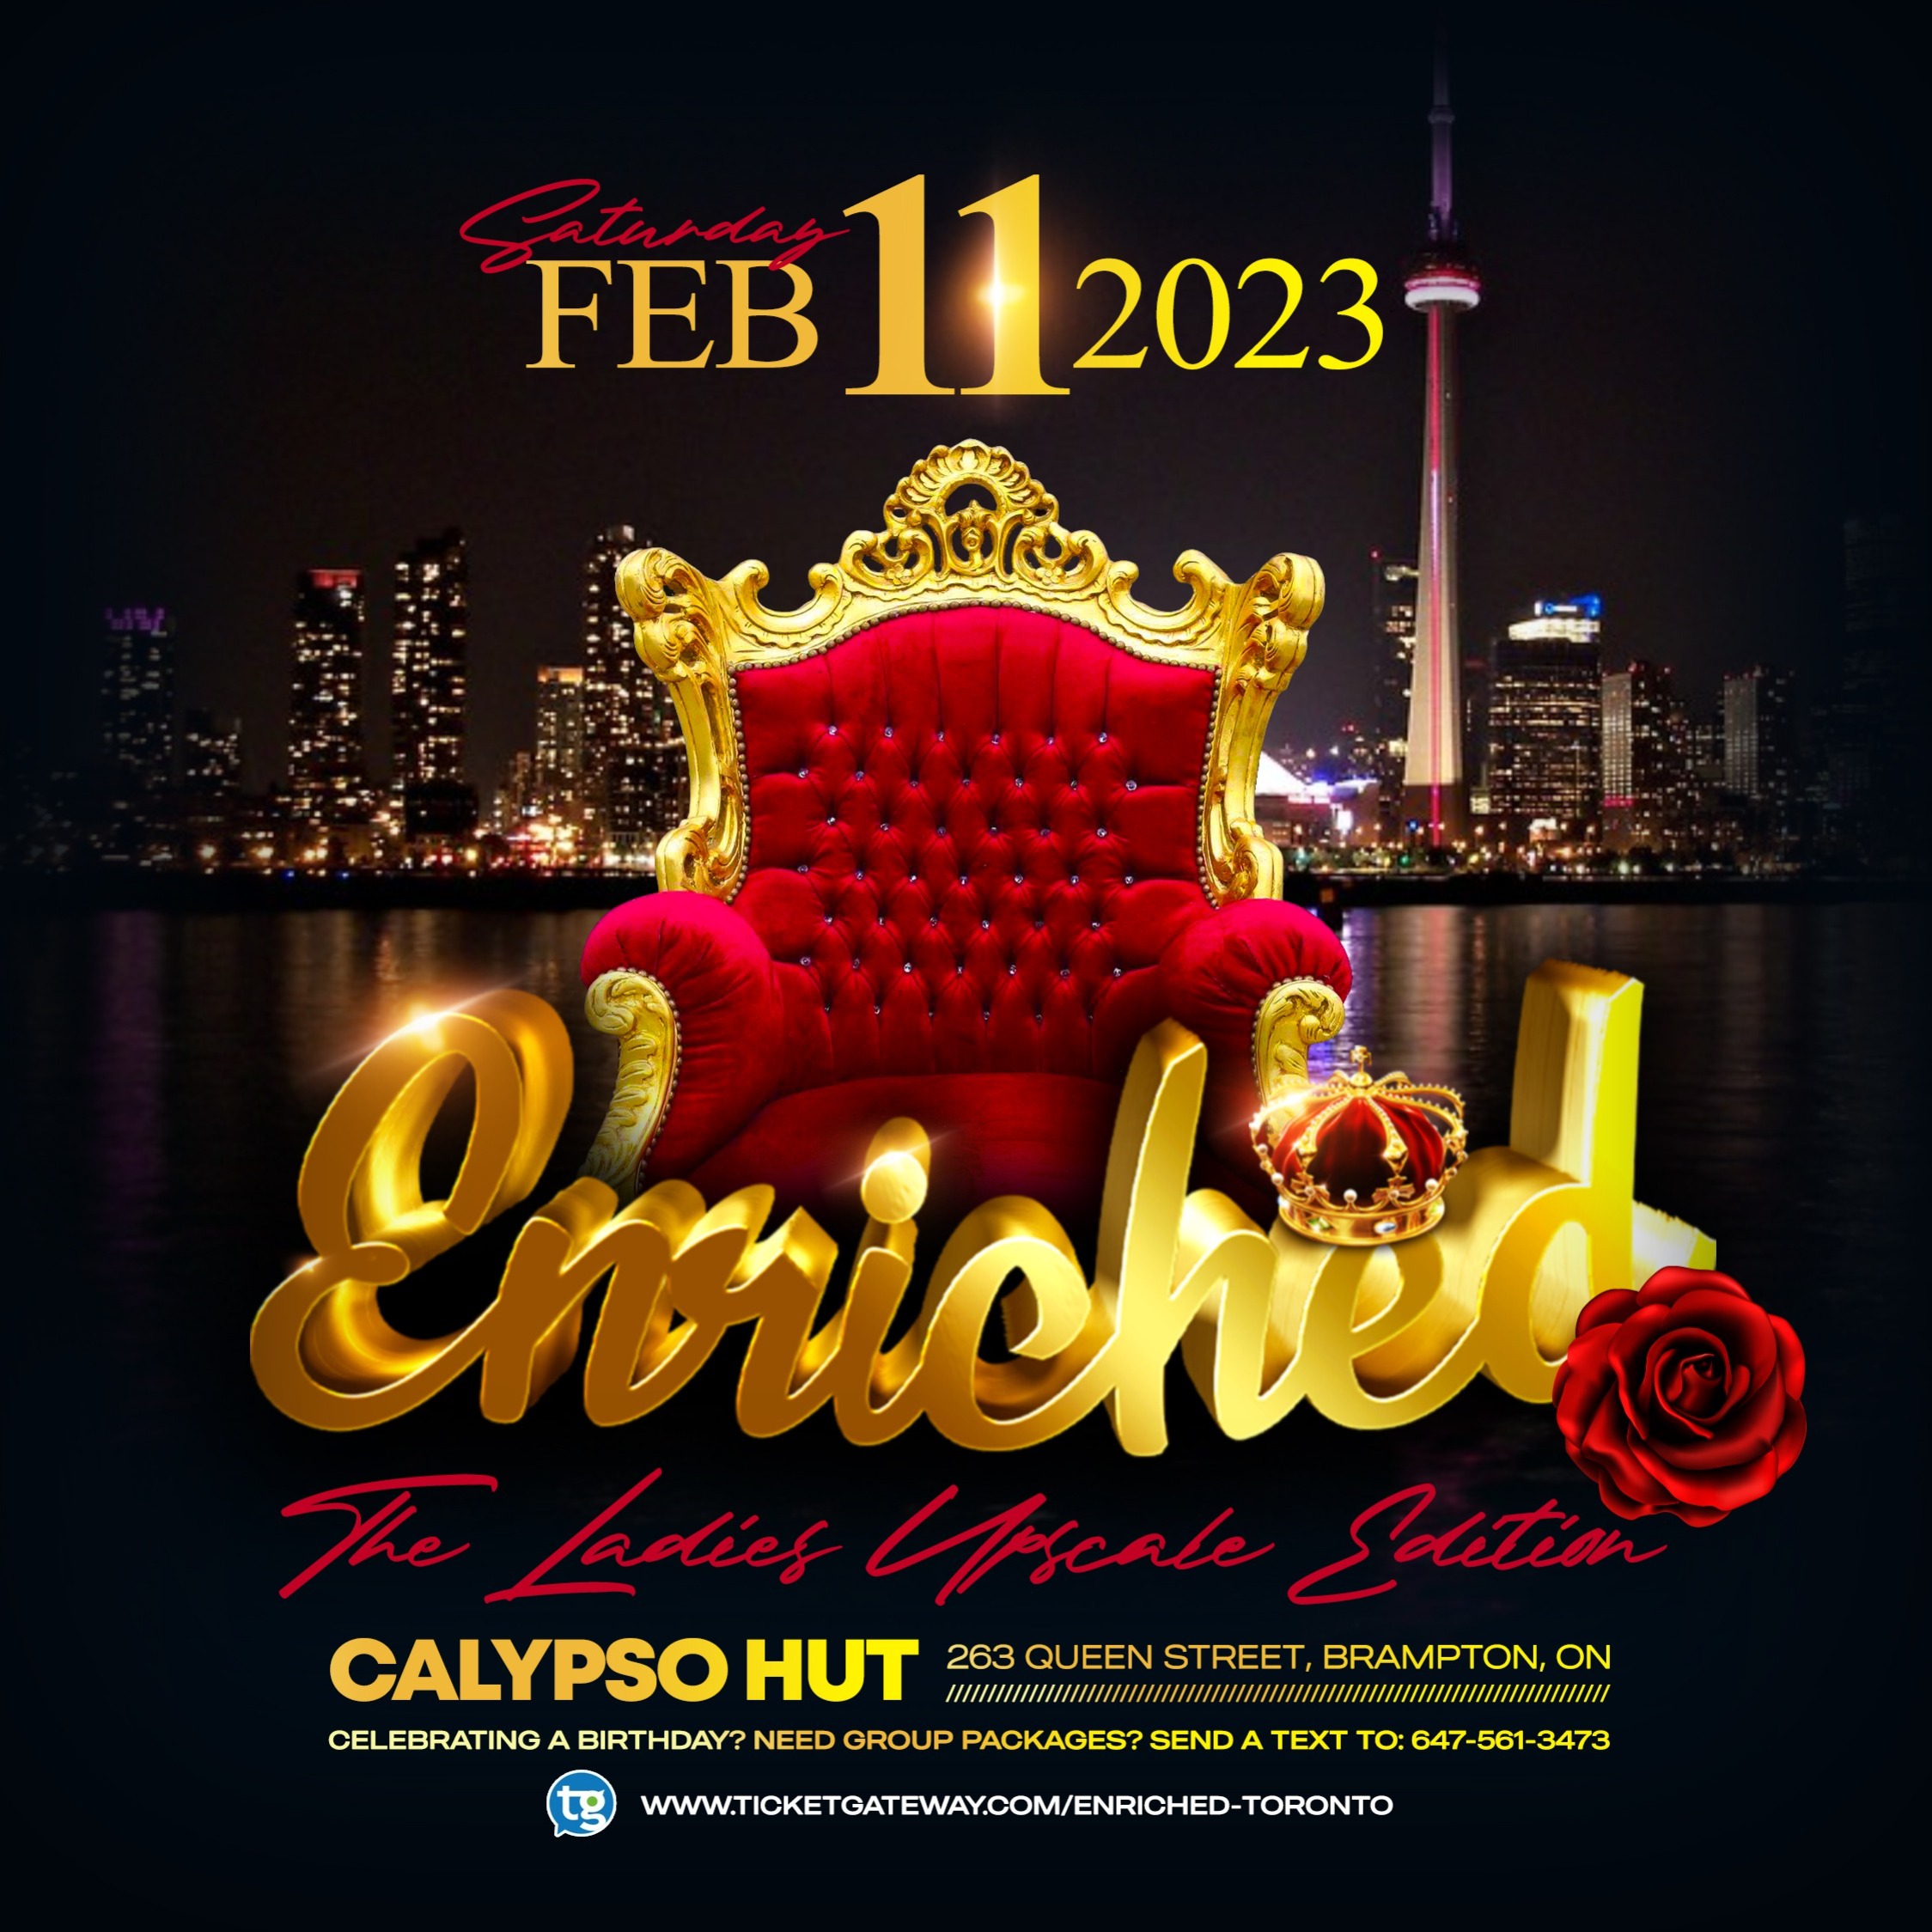 ENRICHED - The Ladies Upscale Edition (Toronto)